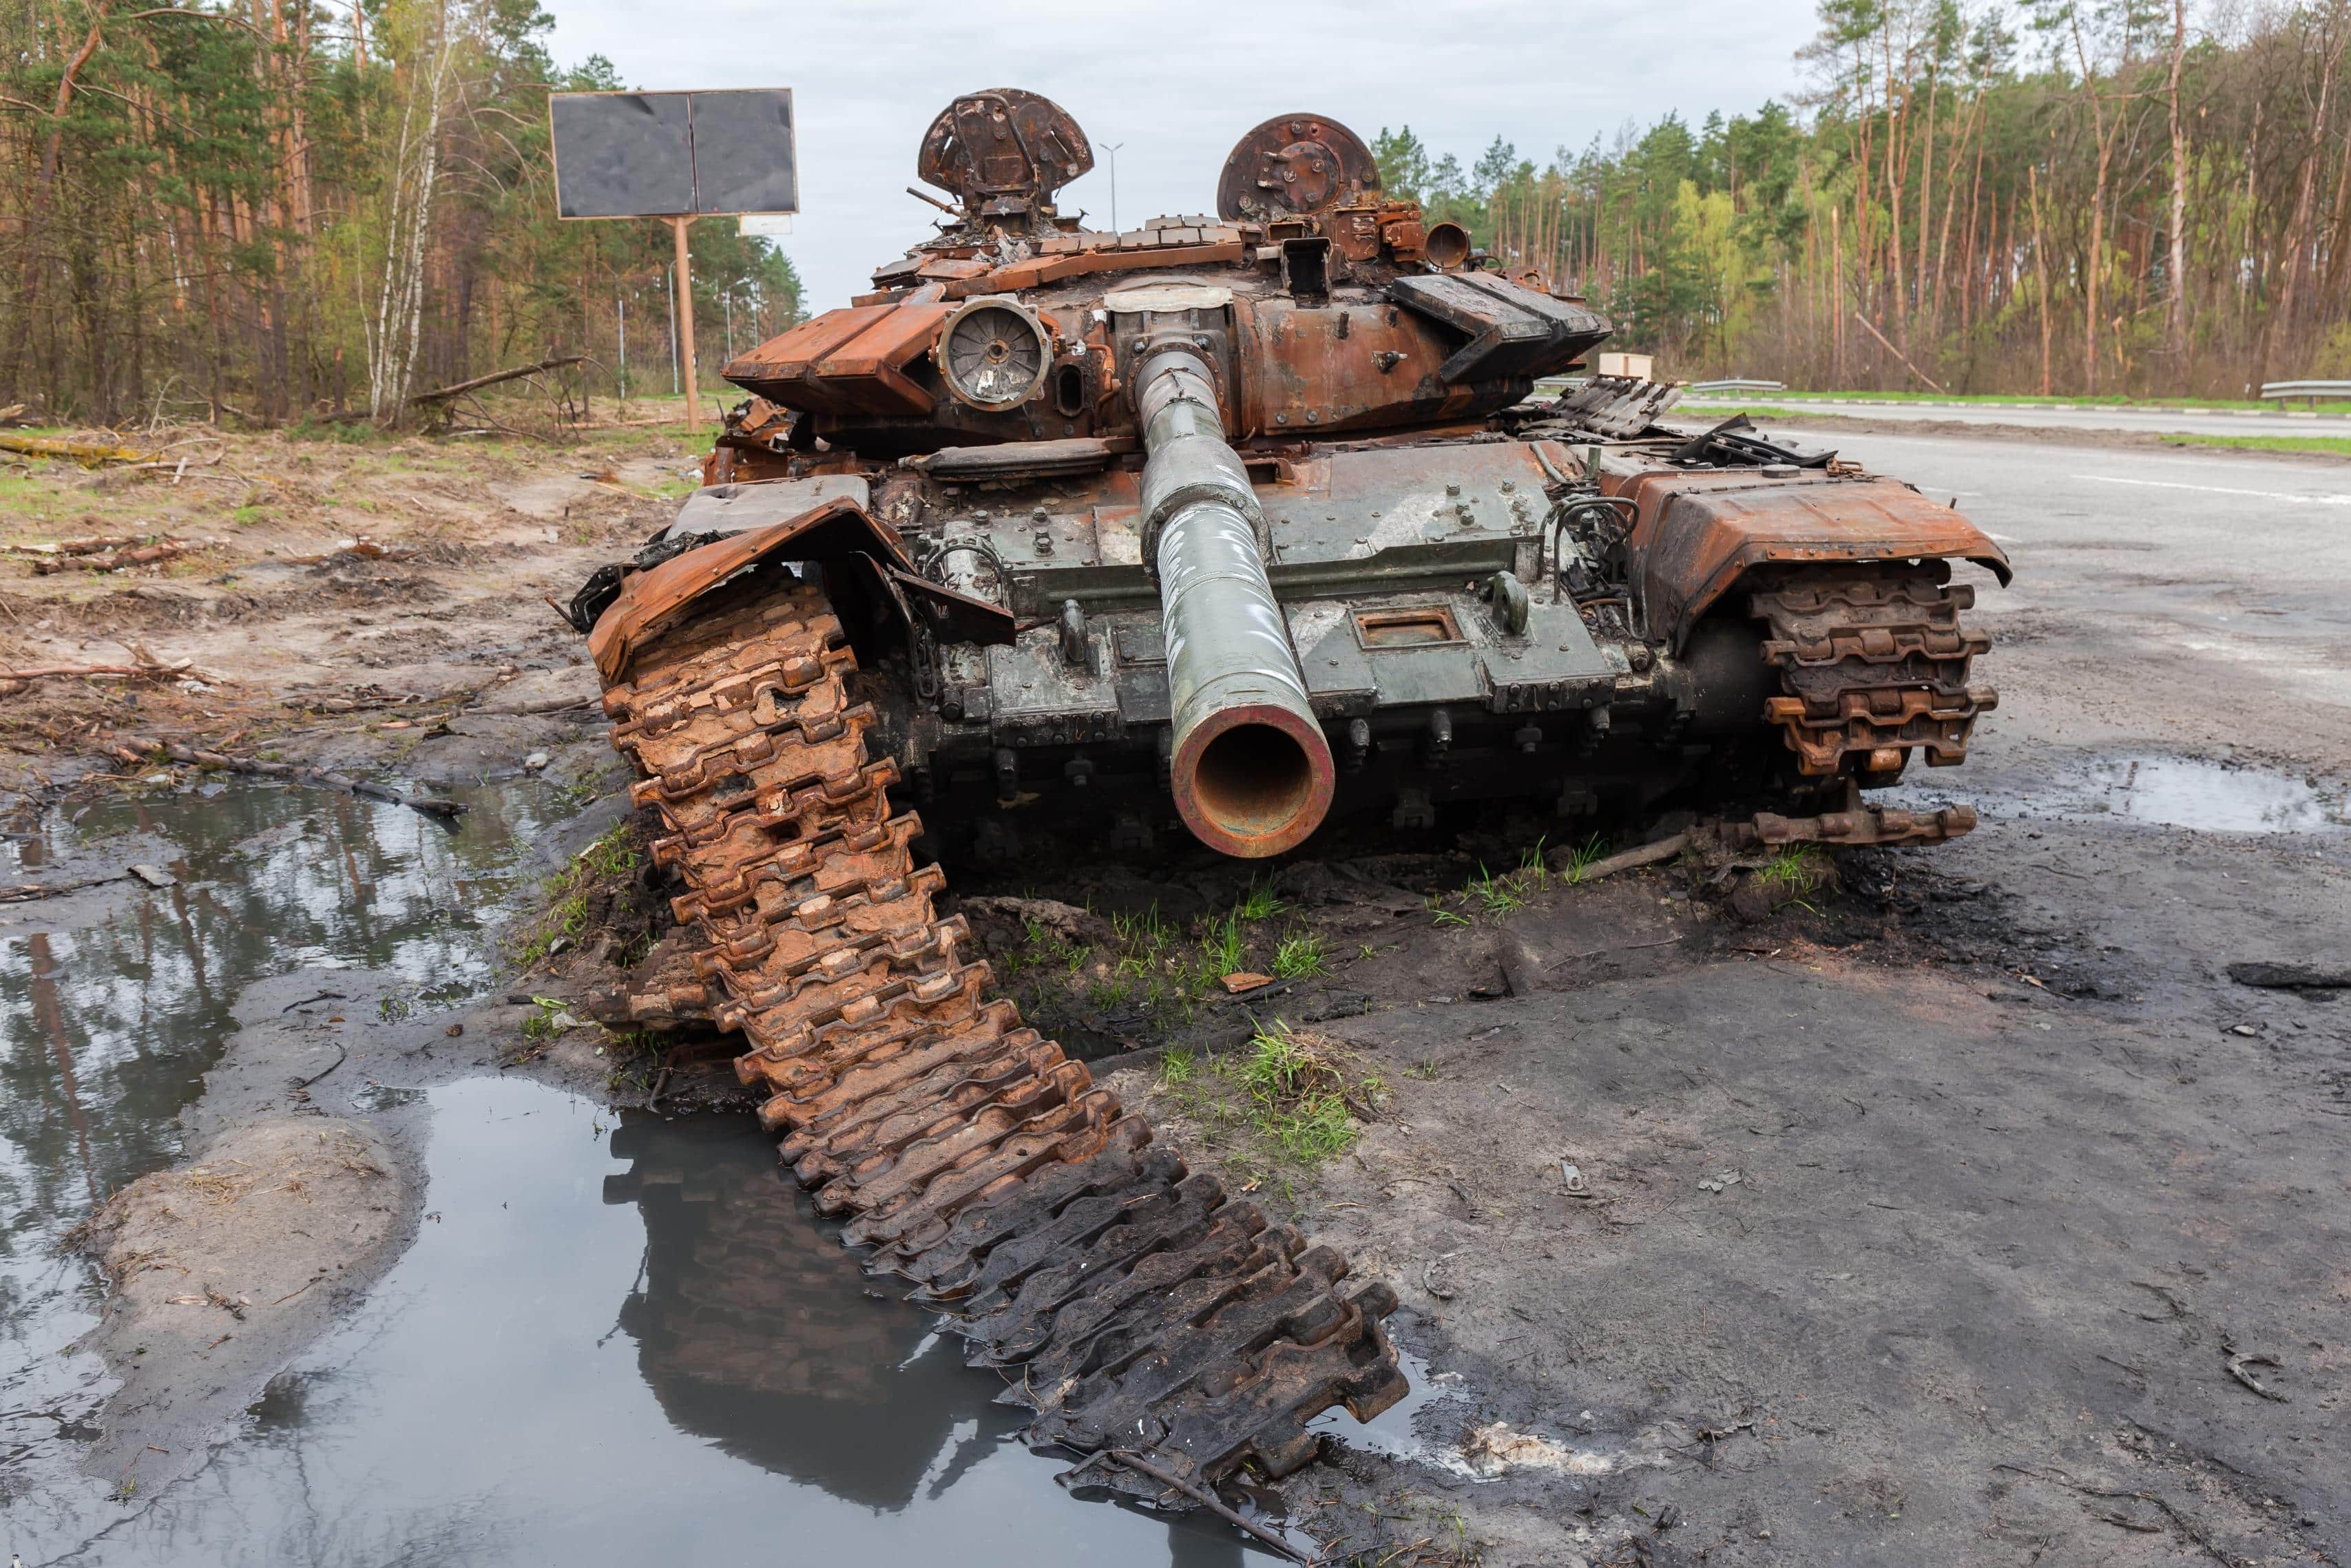 Russian battle tank which was destroyed on the roadside during hostilities in Russian invasion of Ukraine, 2022